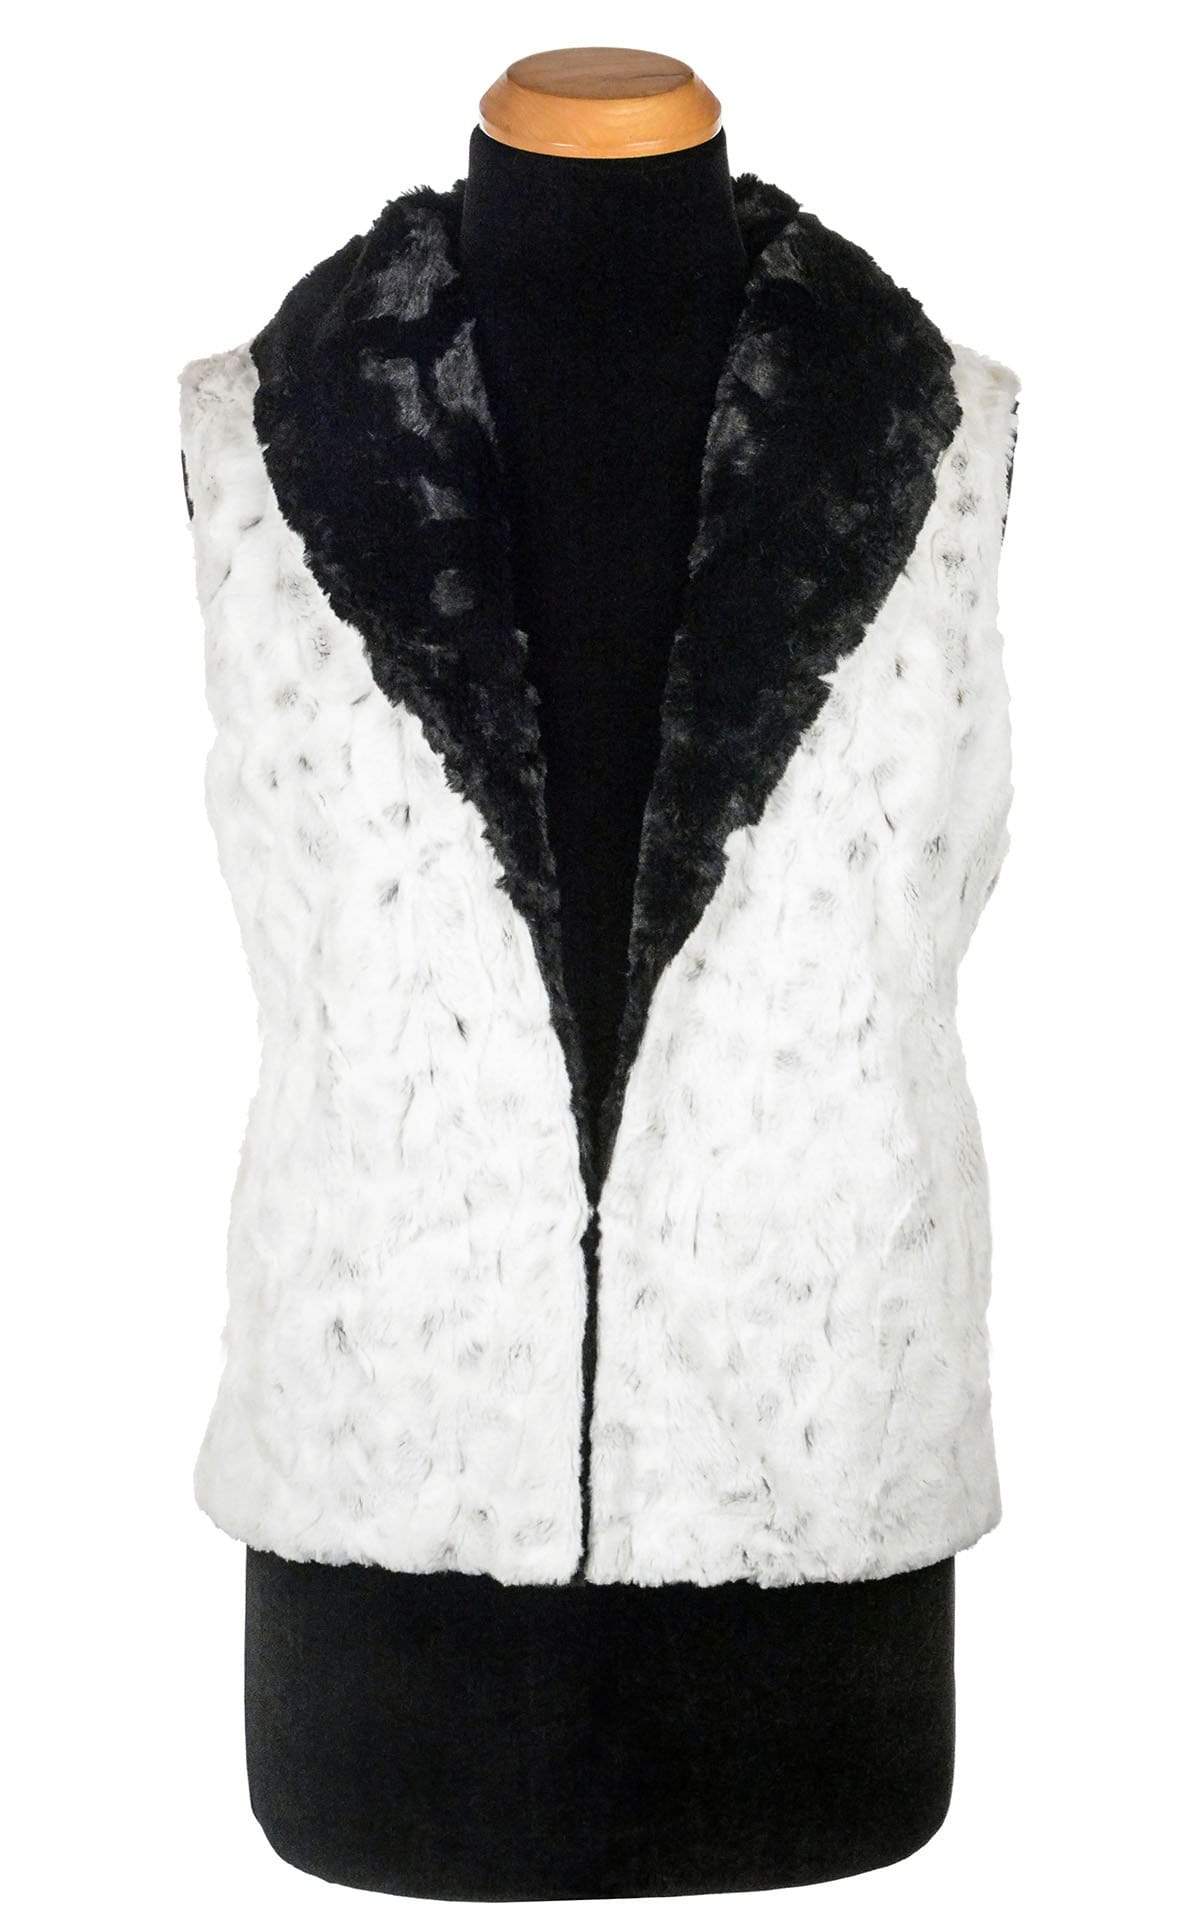 Shawl Collar Vest Closed View | Winter Frost White with Faint Black Spots Faux Fur t | Handmade by Pandemonium Millinery | Seattle WA USA